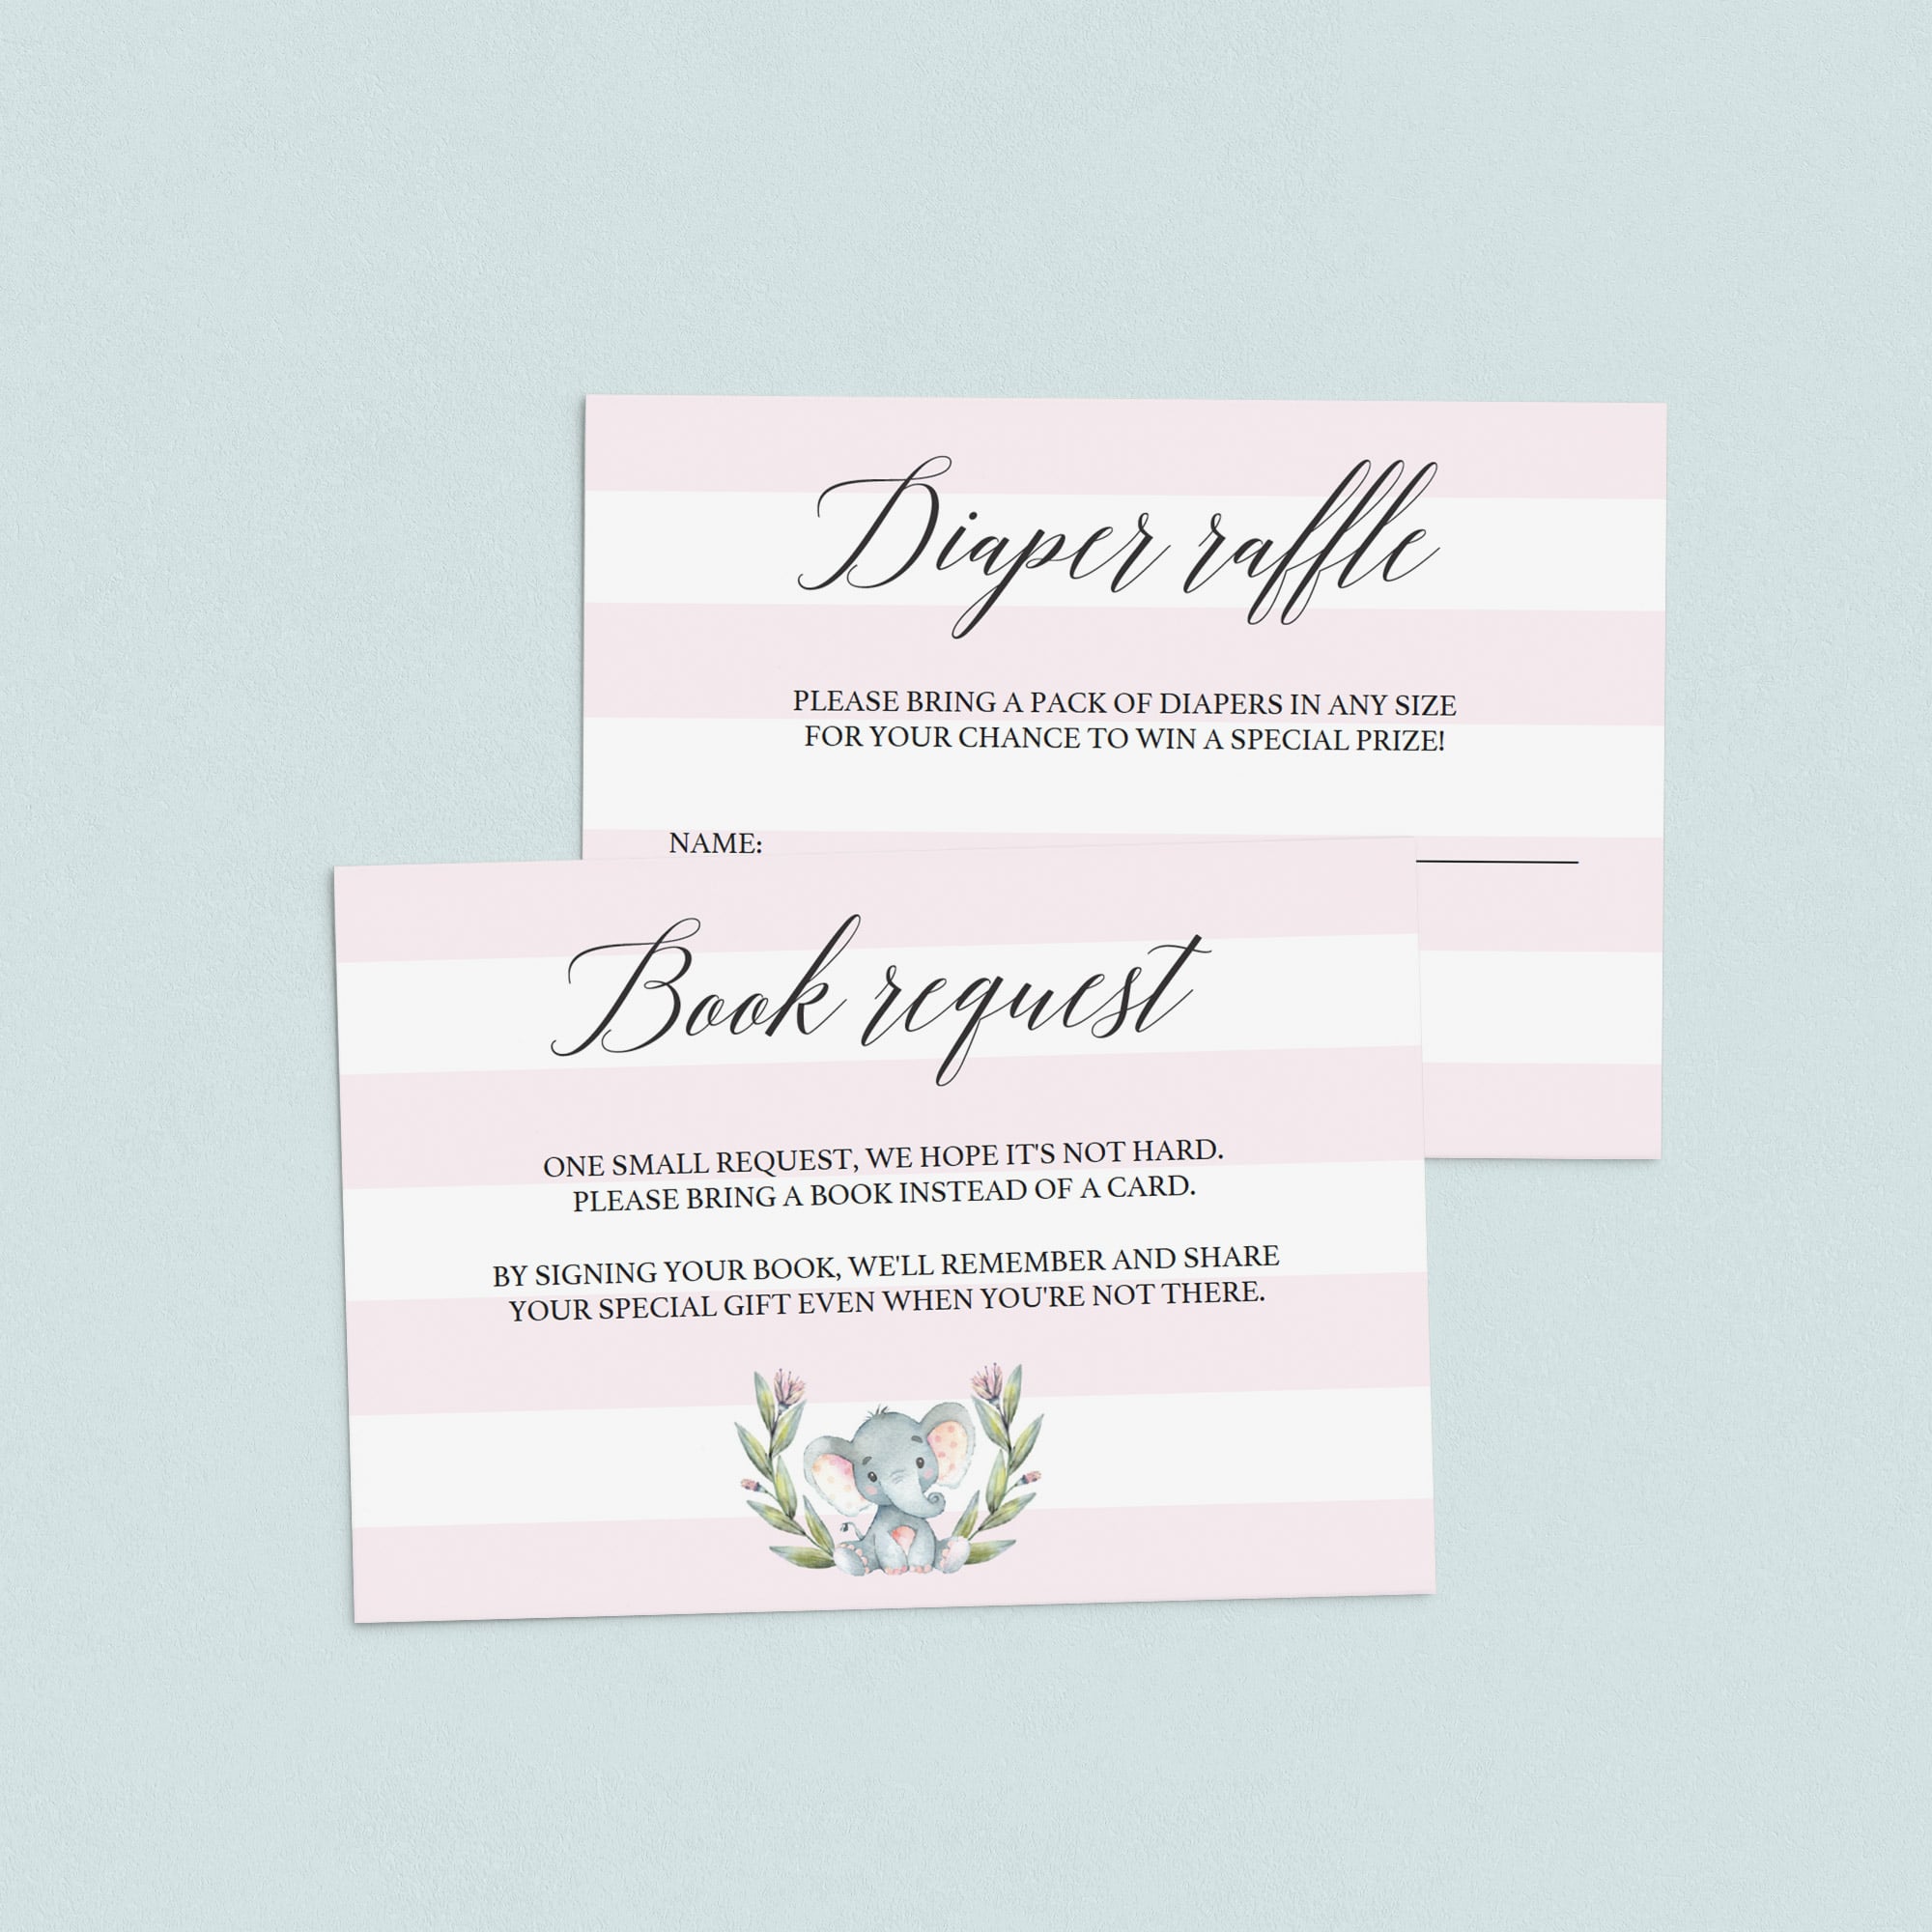 Bring a book instead of a card template for elephant baby shower by LittleSizzle